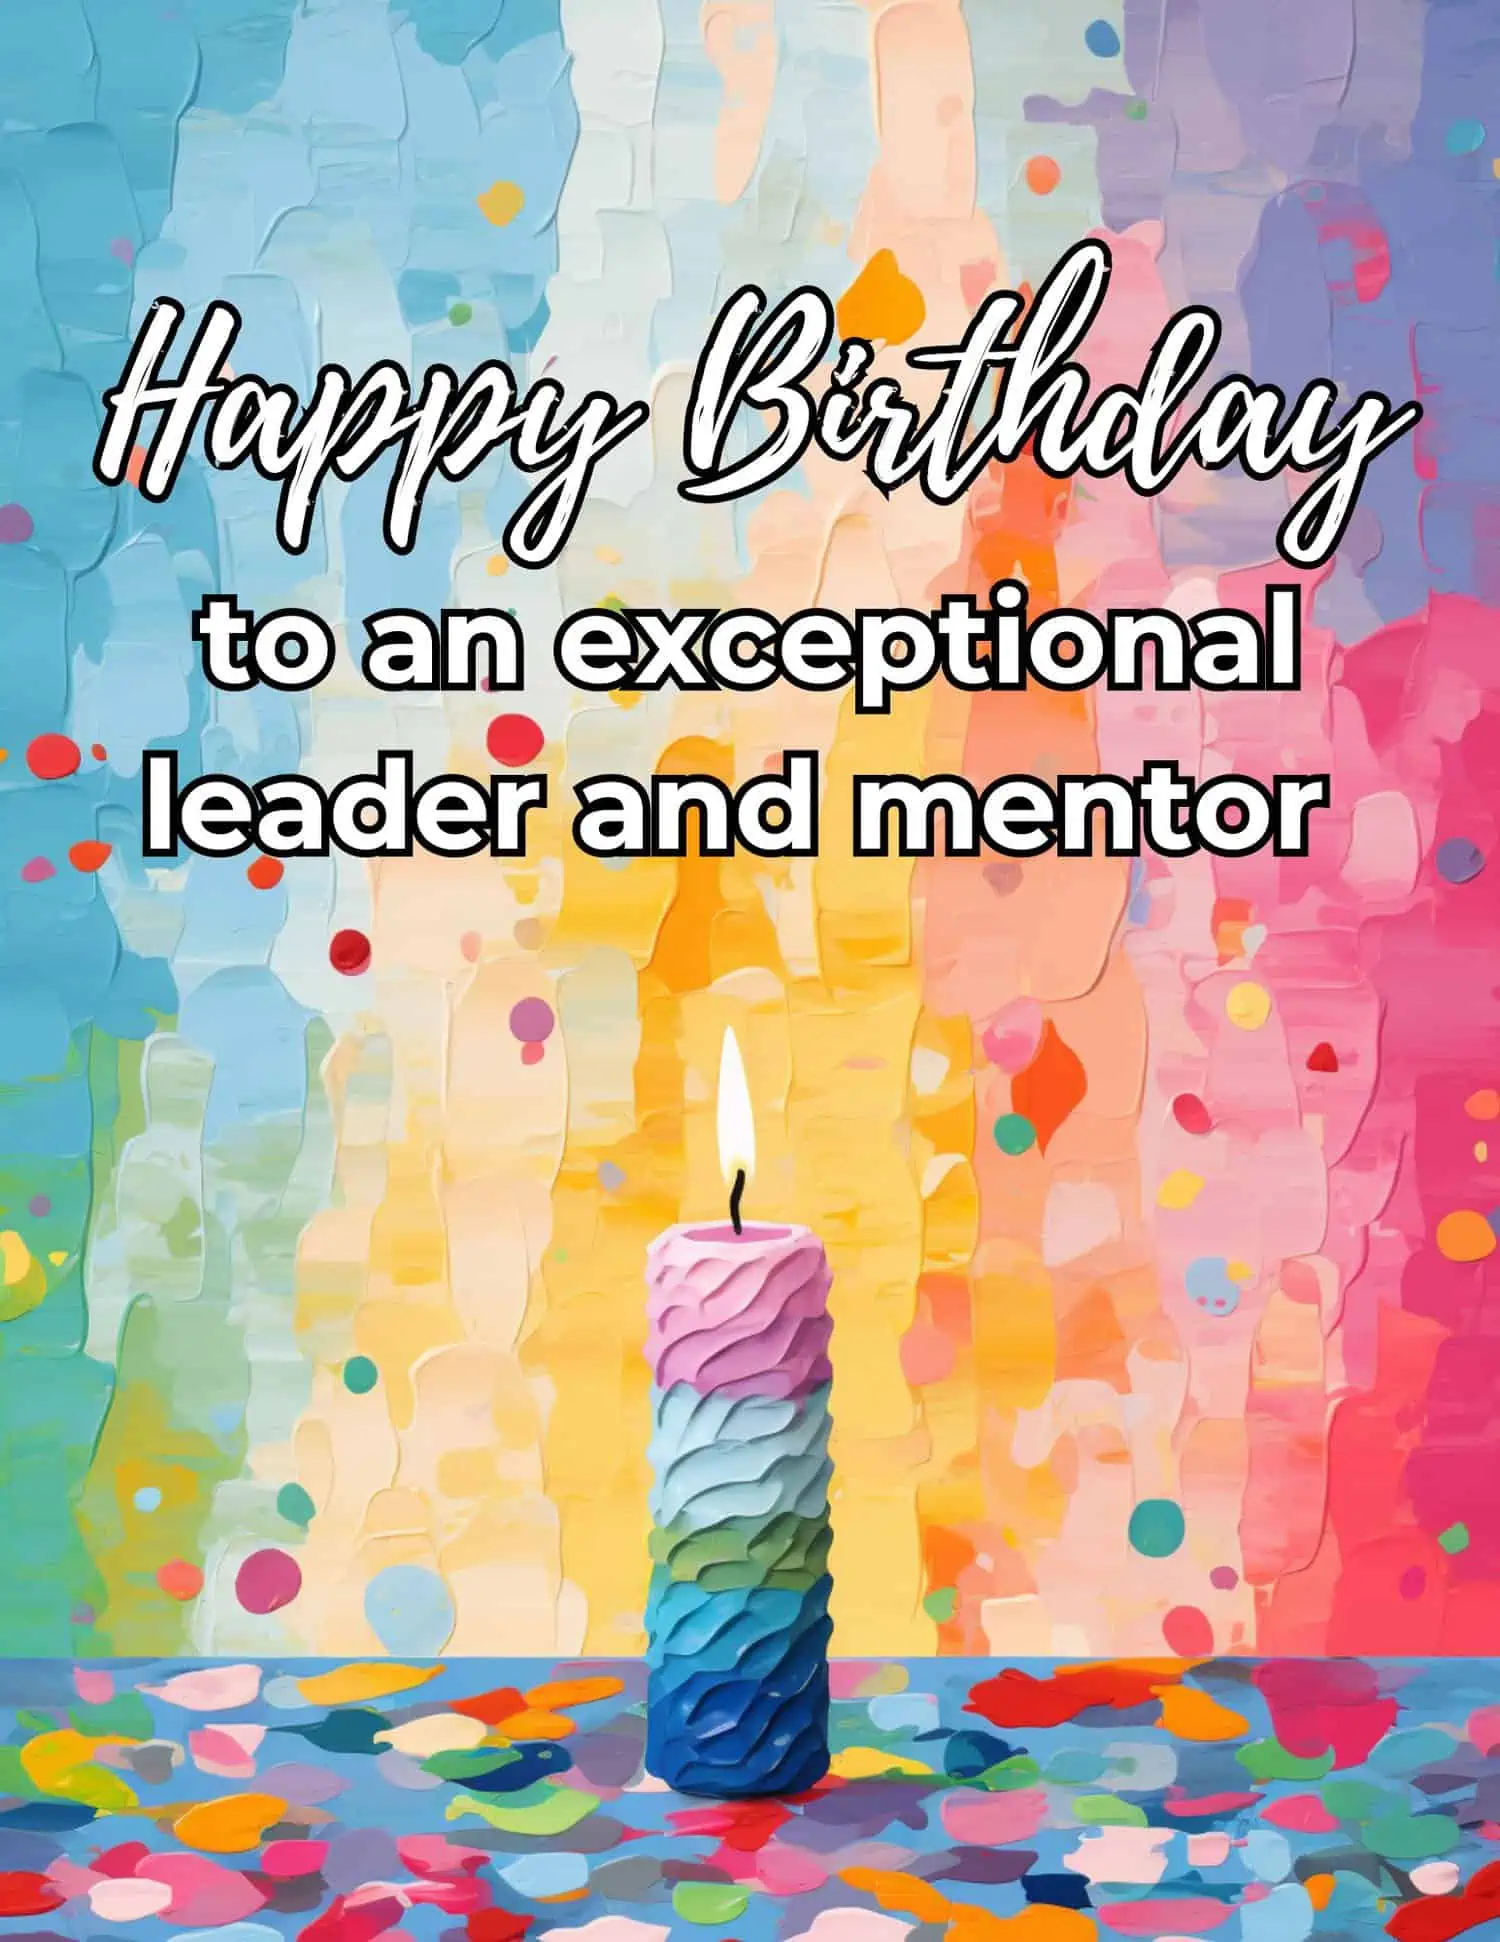 Explore a collection of concise and meaningful birthday messages tailored for your boss, perfect for conveying respect and appreciation in a professional and succinct way.